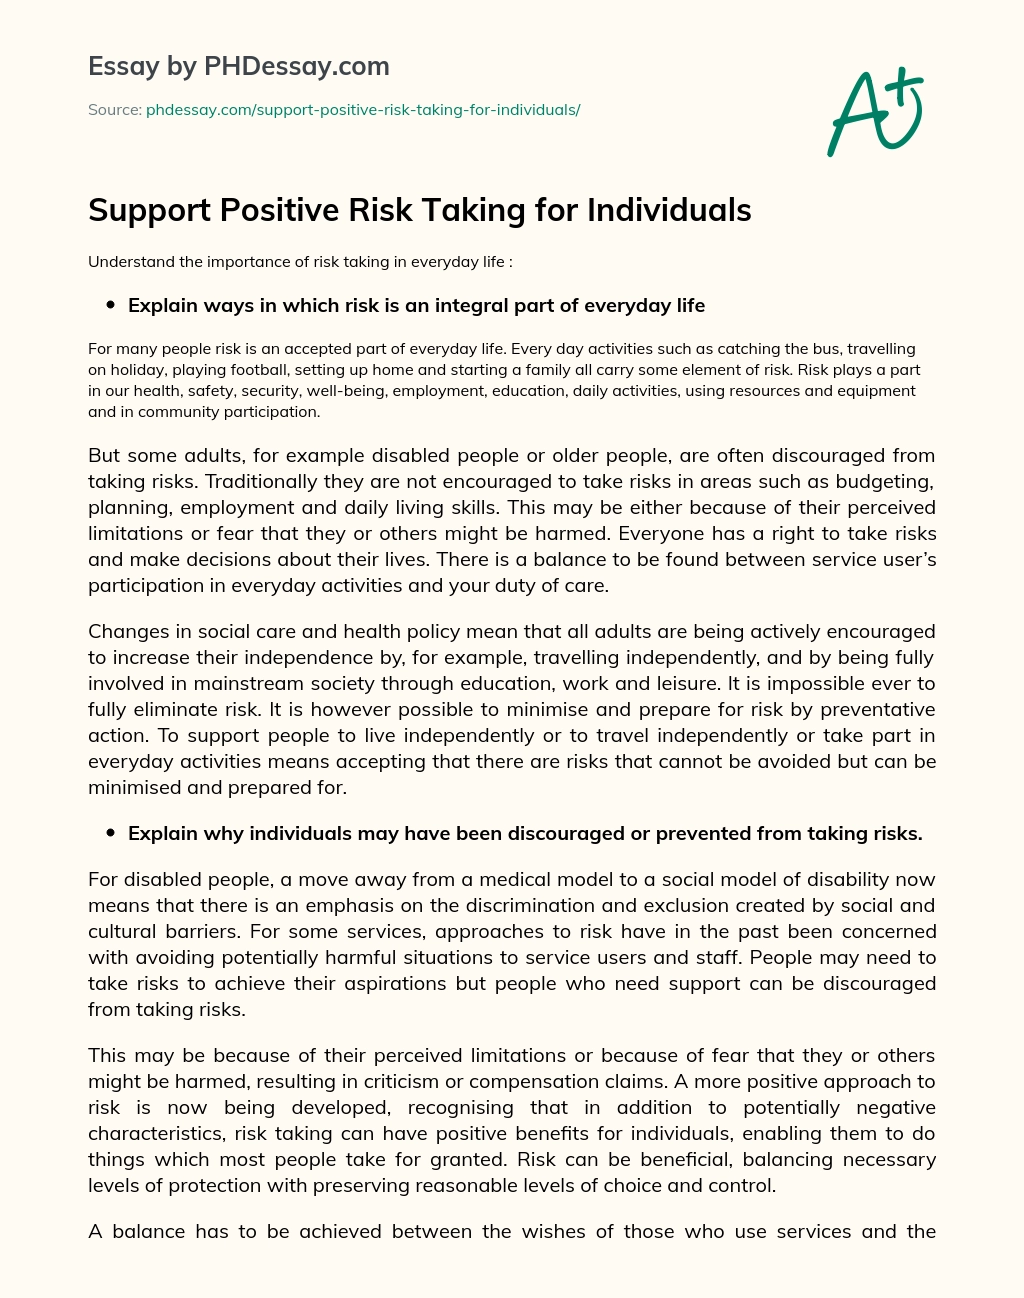 Support Positive Risk Taking for Individuals essay